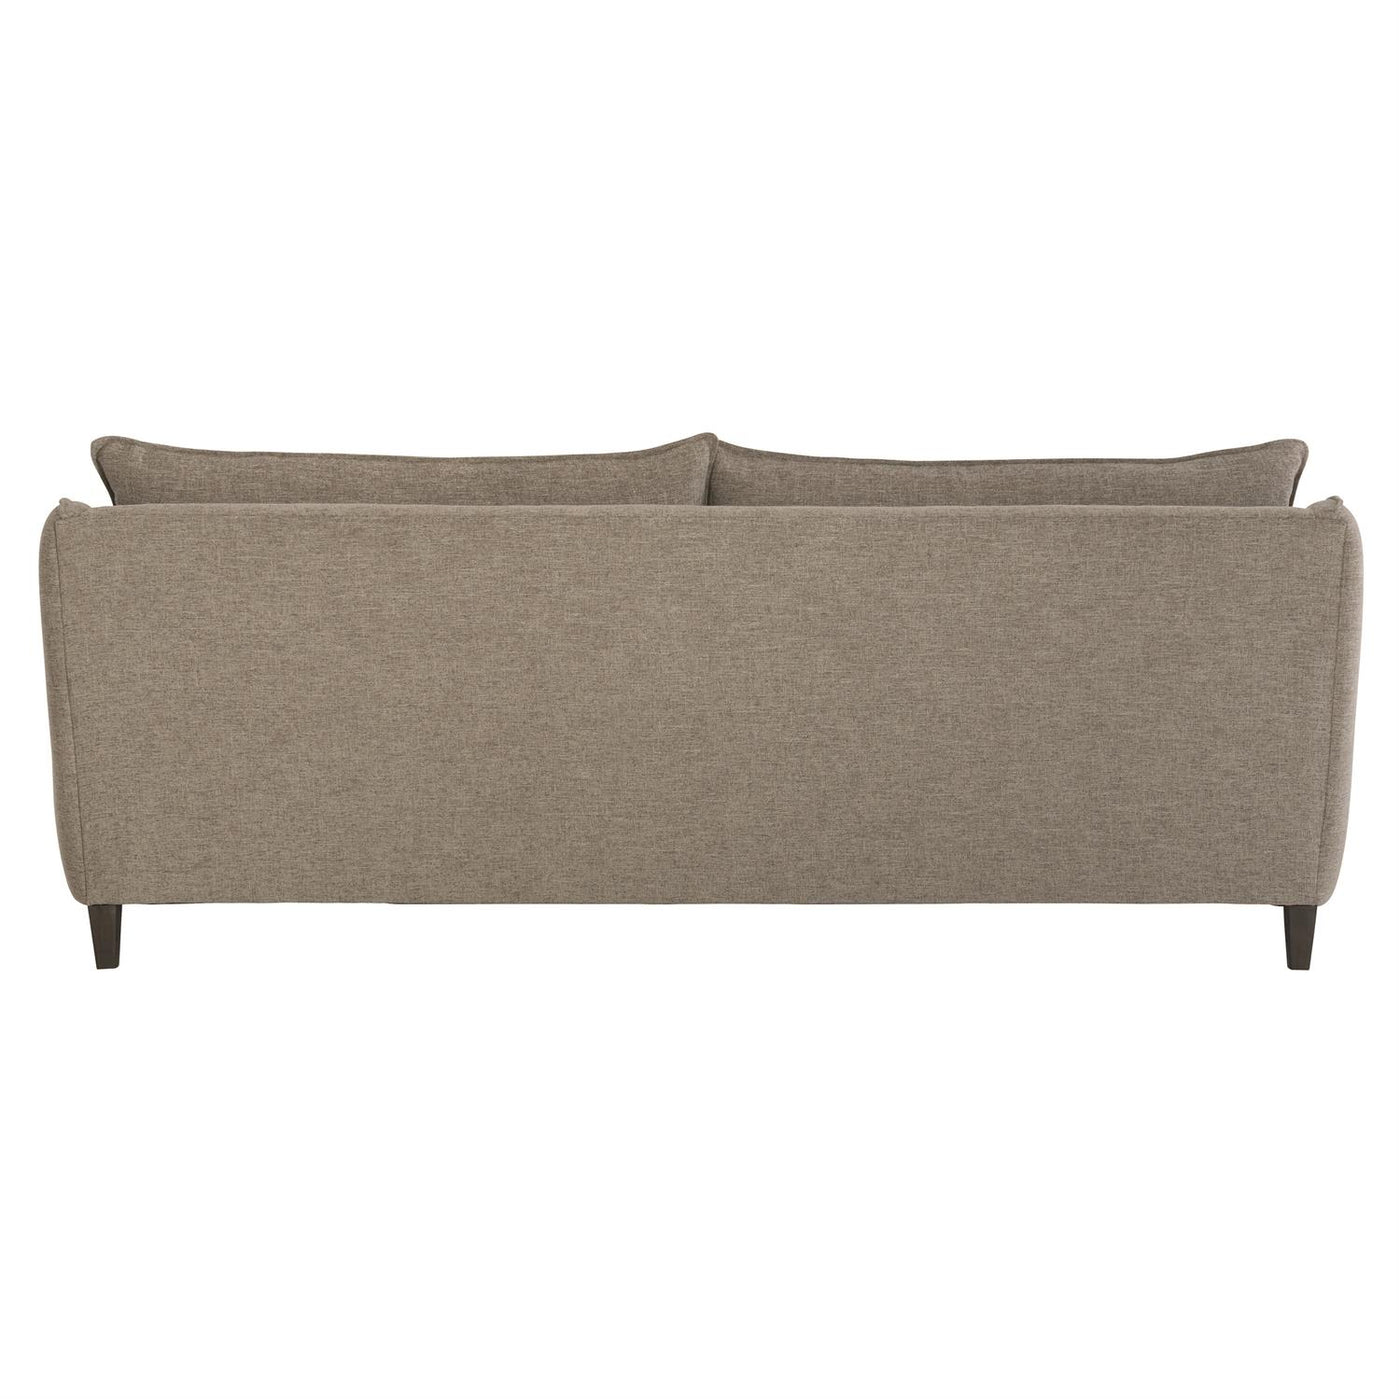 SOFA UPHOLSTERED 2-OVER-2 CURVED ARMS